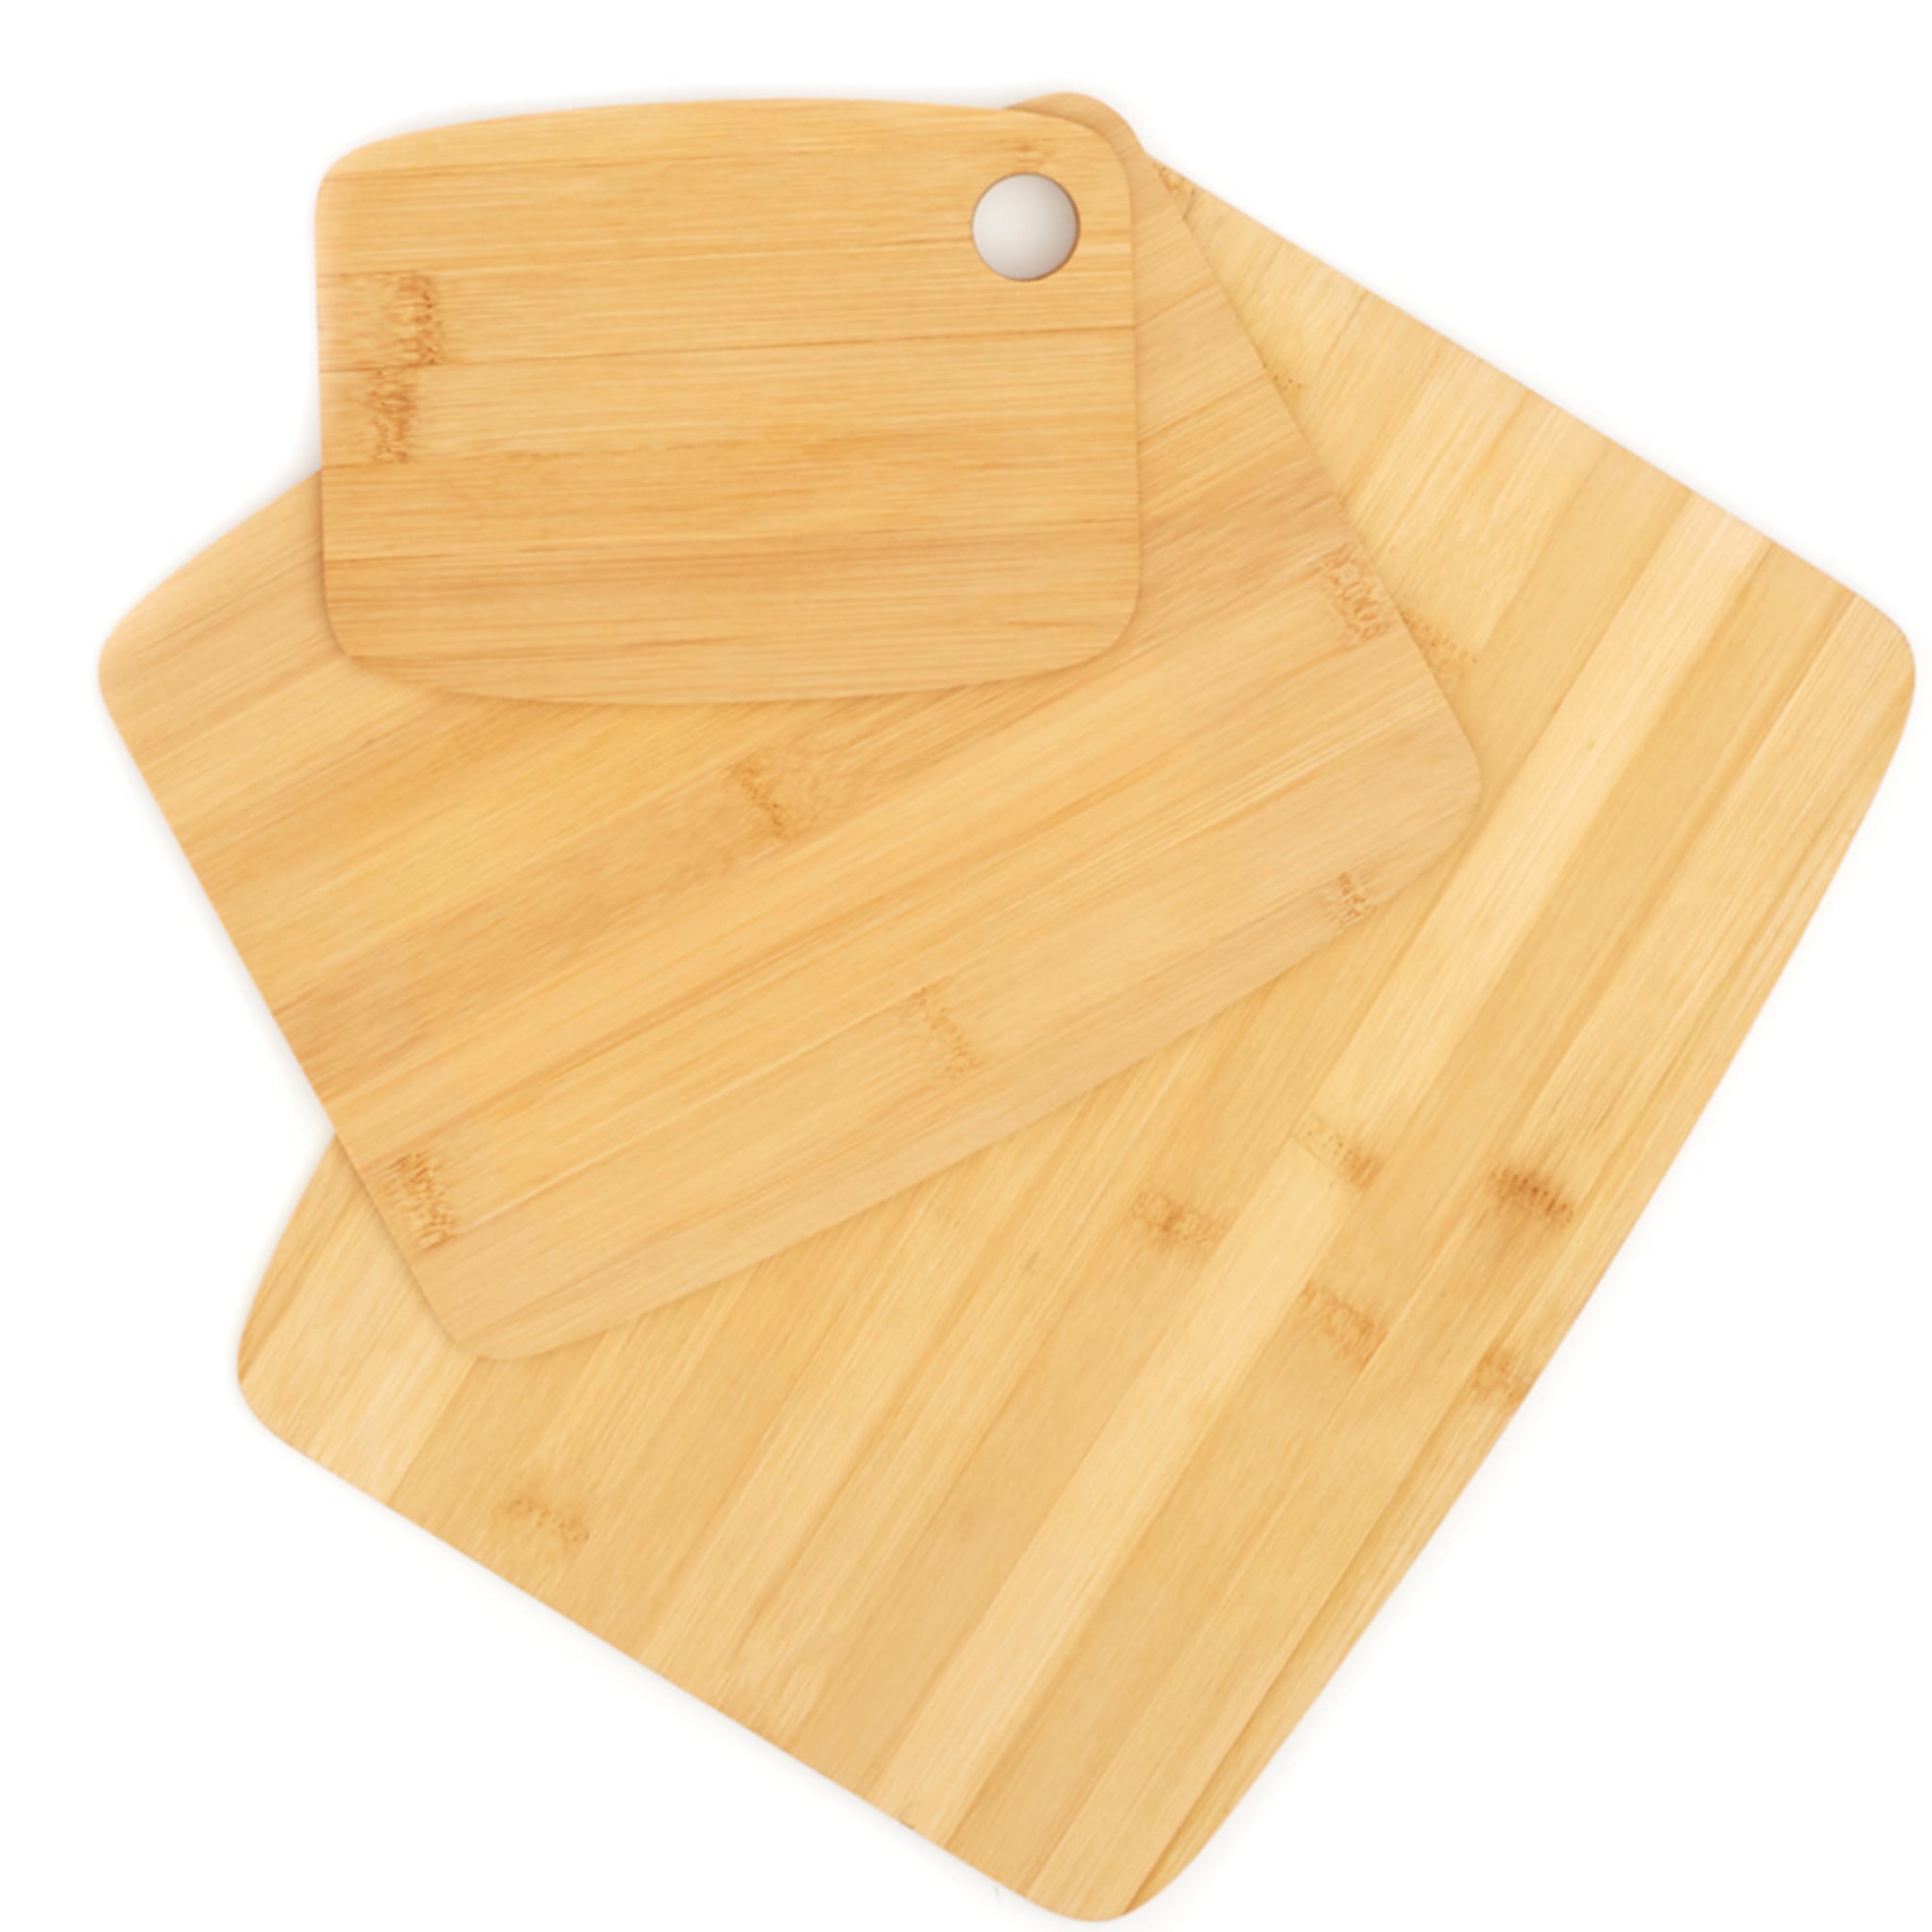 Bamboo Cutting Board, Natural Sold by at Home